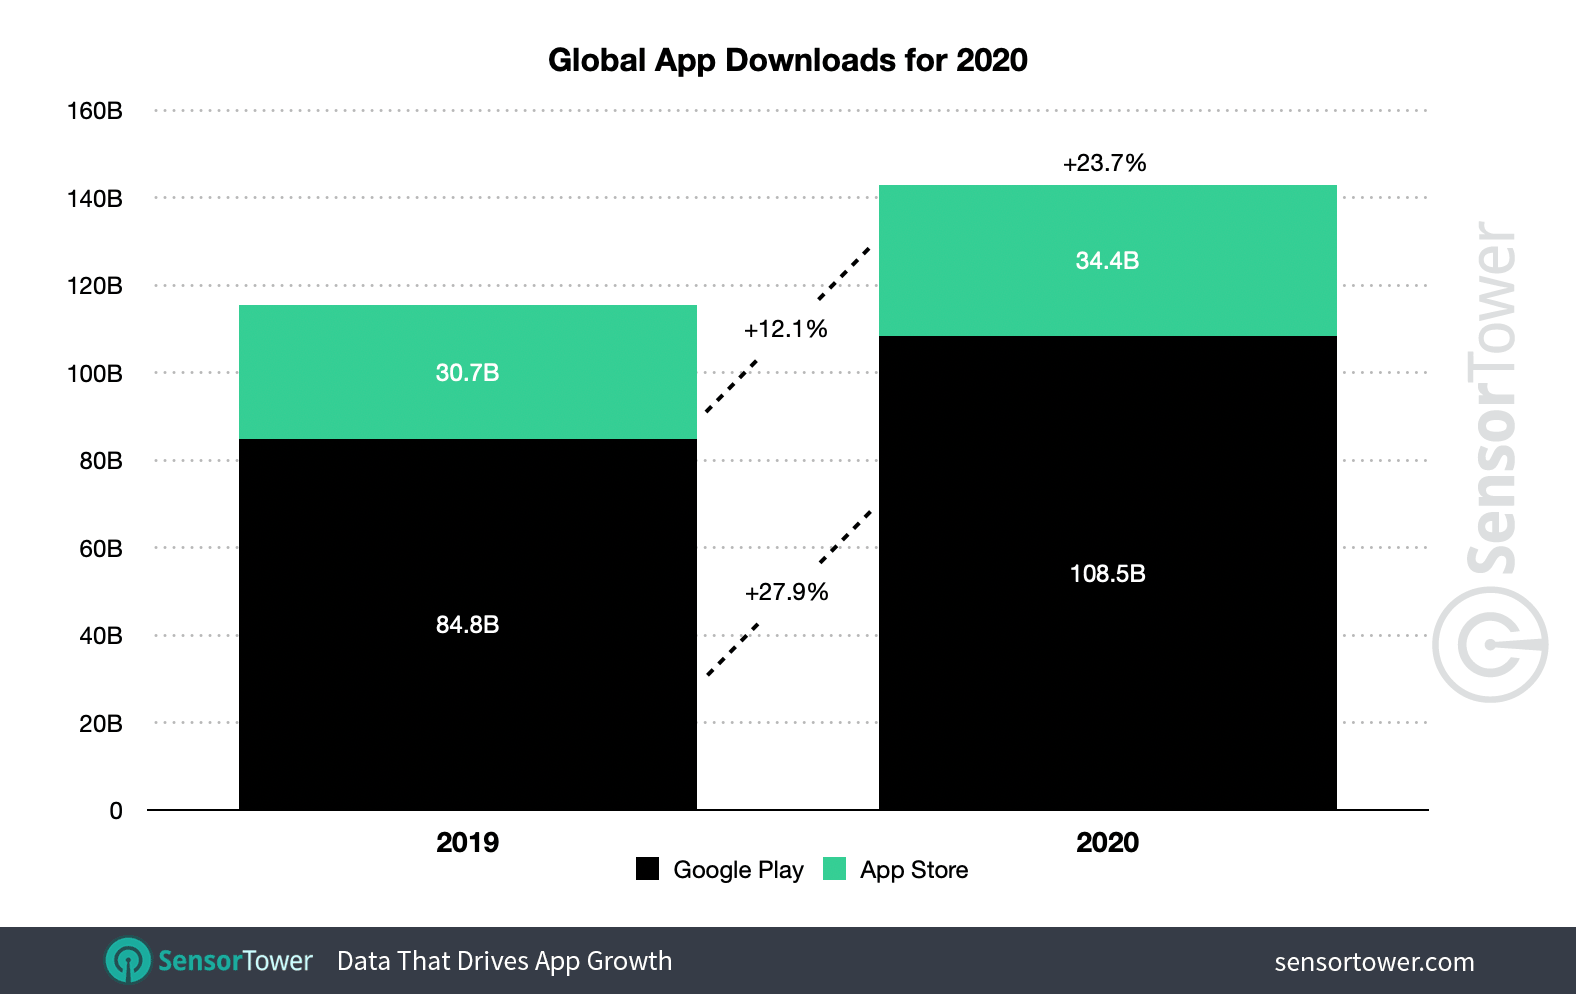 Worldwide downloads of non-game apps grew 18.4 percent year-over-year to 86.7 billion in 2020.